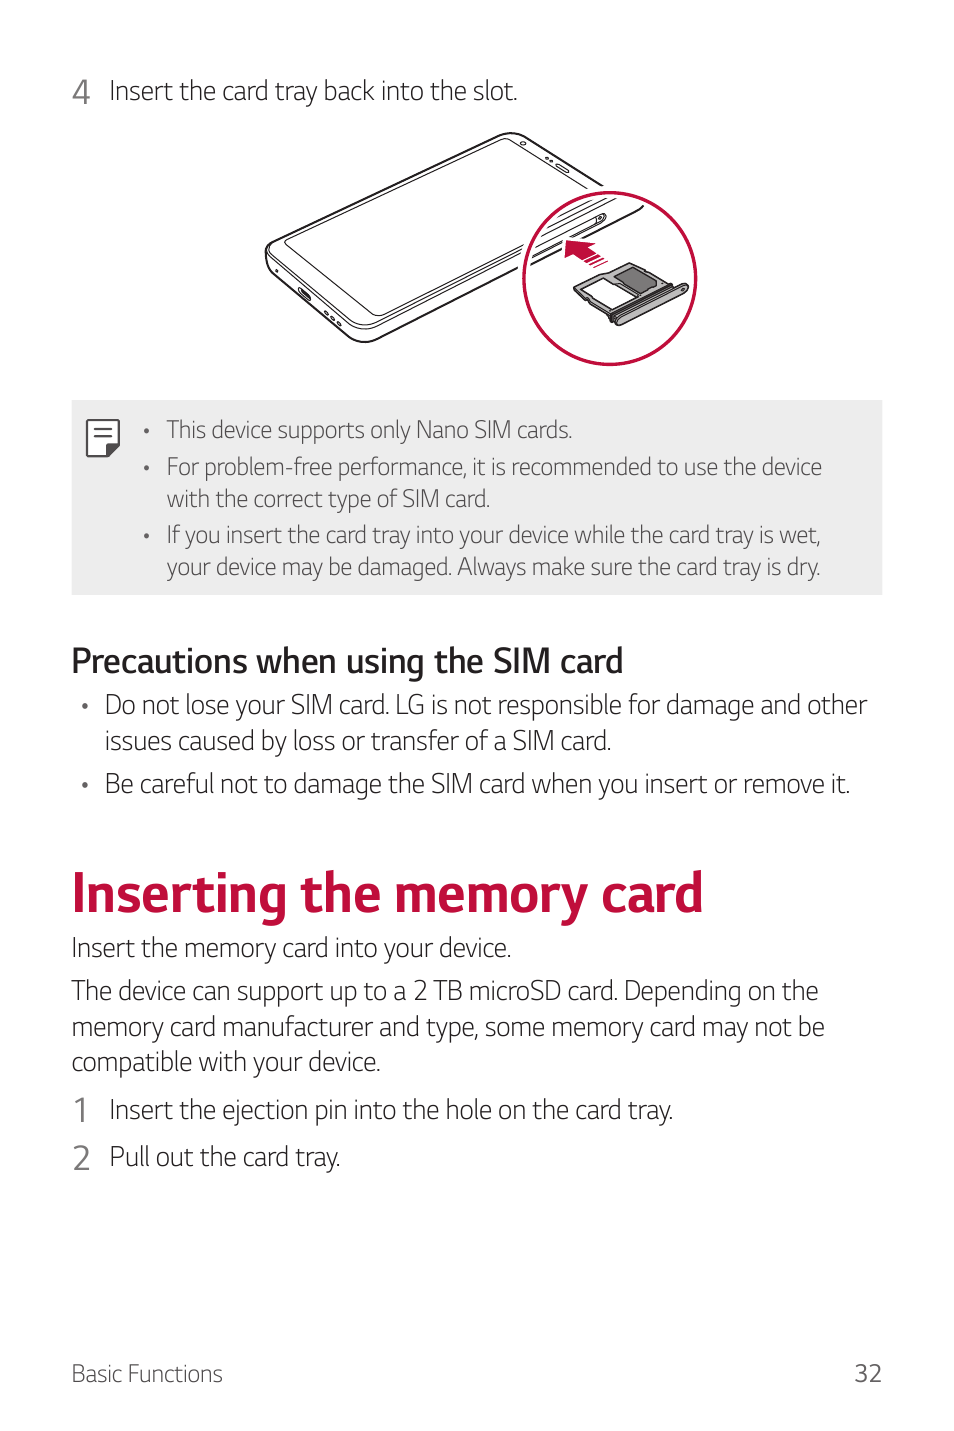 Inserting the memory card, Precautions when using the sim card | LG G6 H872 User Manual | Page 33 / 183